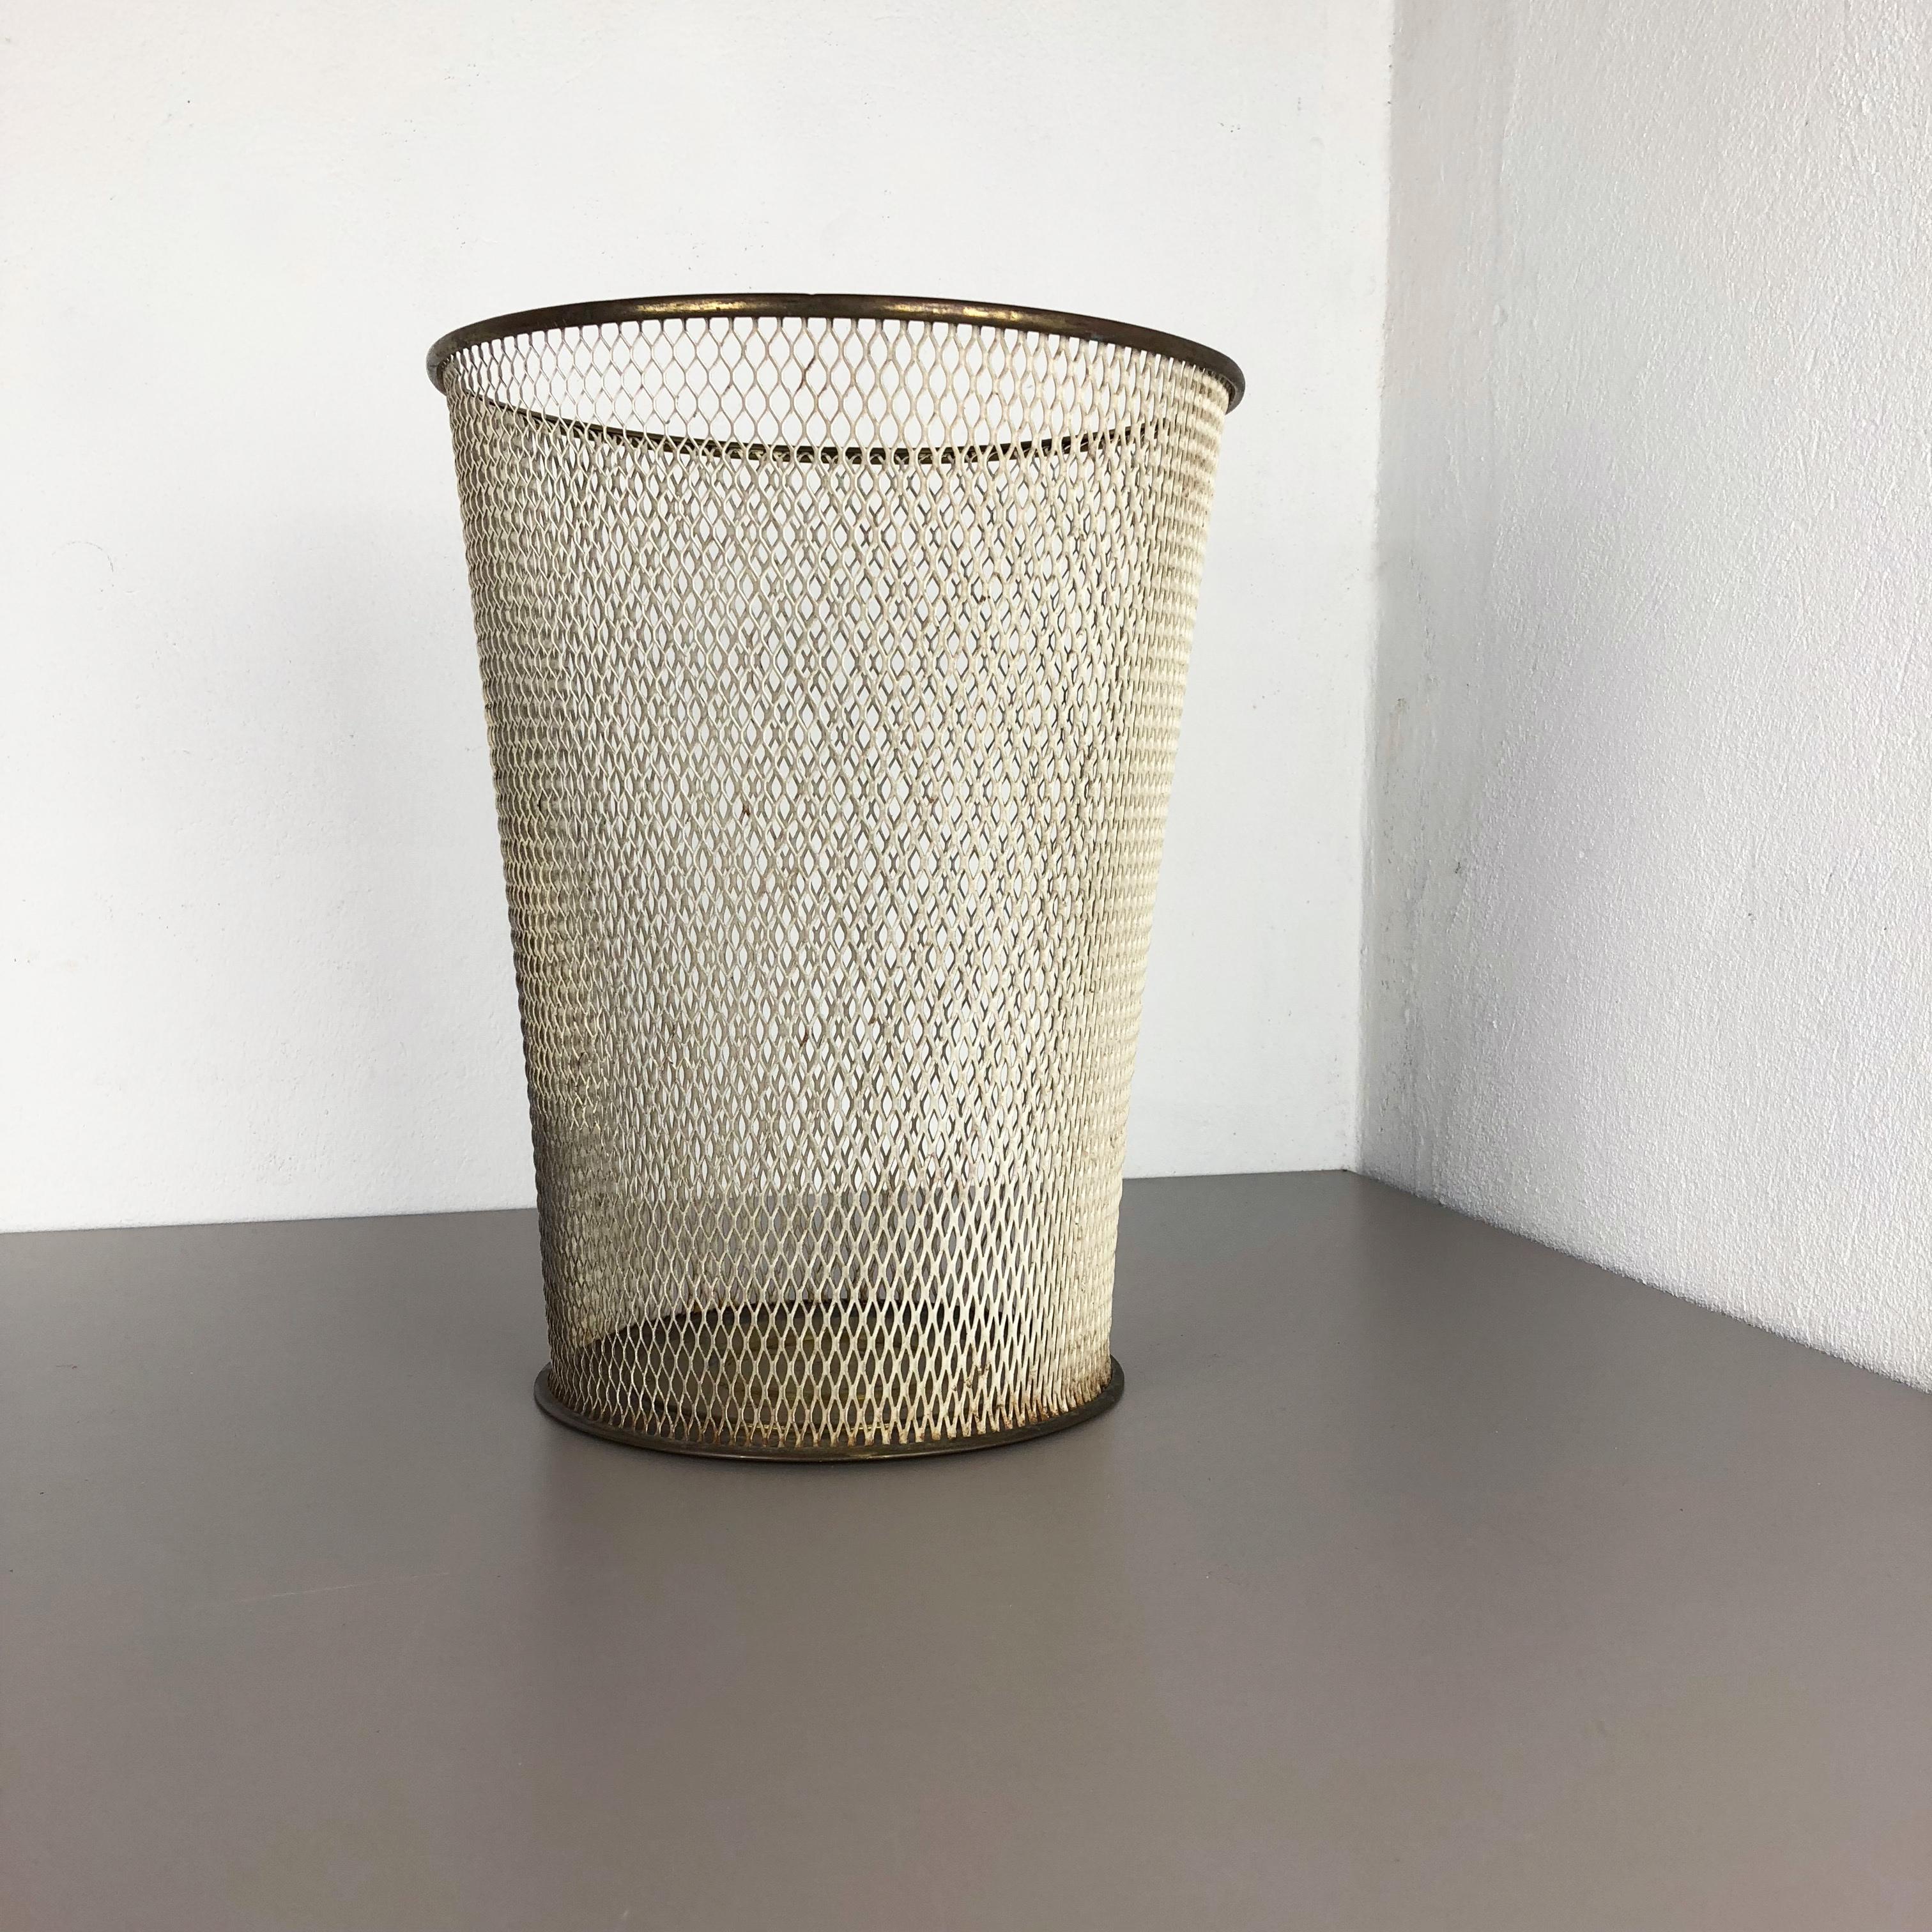 Article: Waste bin  paper bin
Origin: France
Age: 1950s

This original vintage Bauhaus style waste bin paper bin was produced in the 1950s in France. It is made of solid metal with brass applications at the top edge ring and bottom stand. this